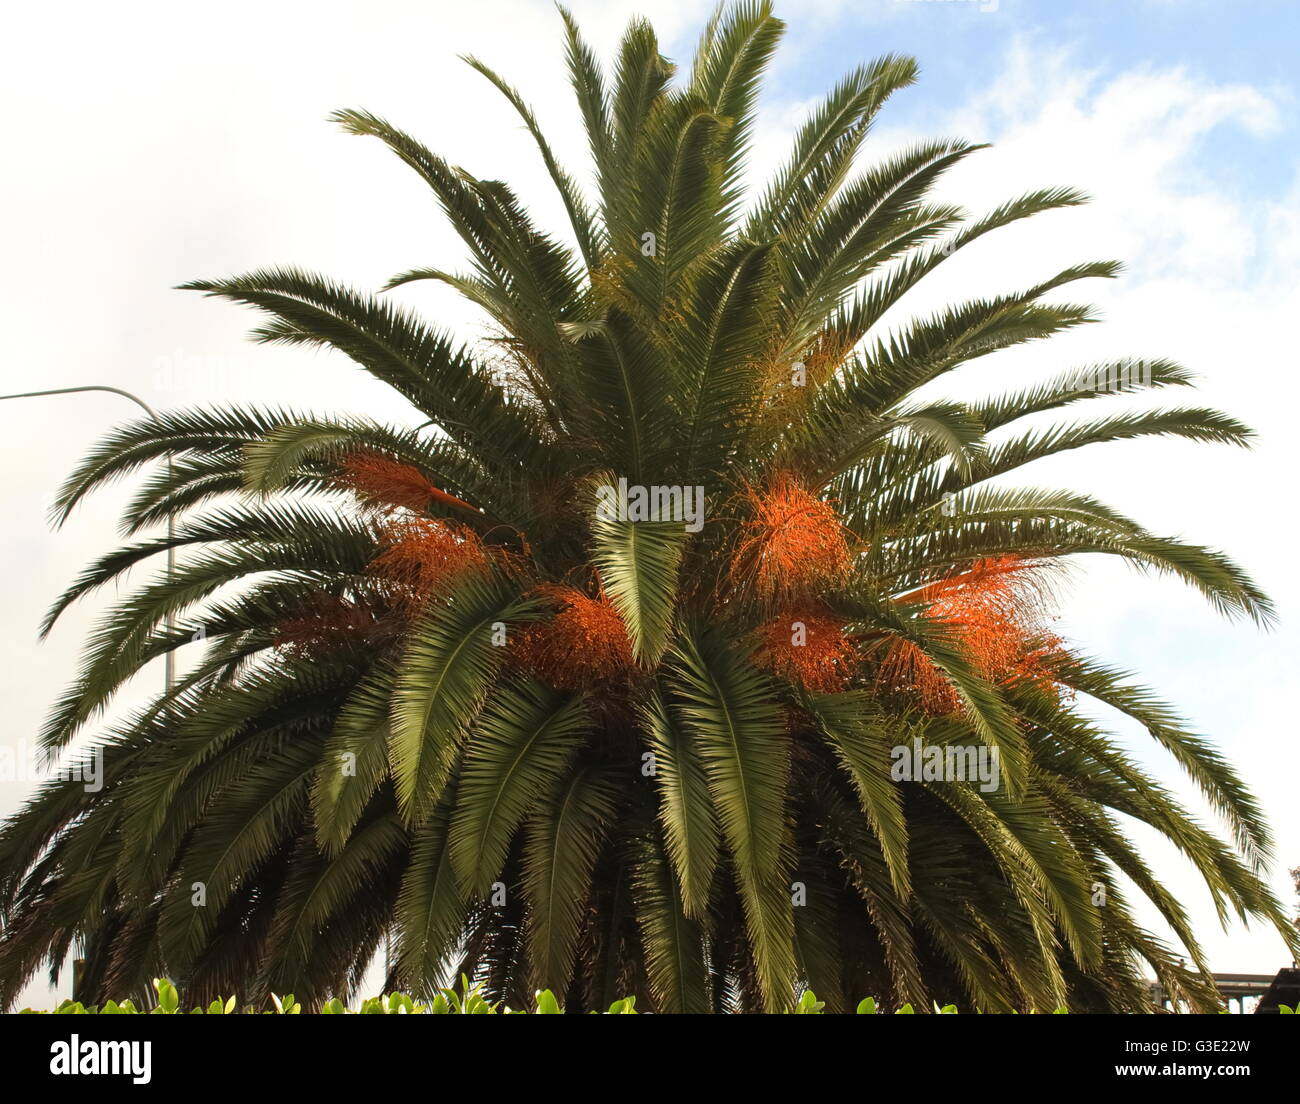 Palm tree with nuts Stock Photo